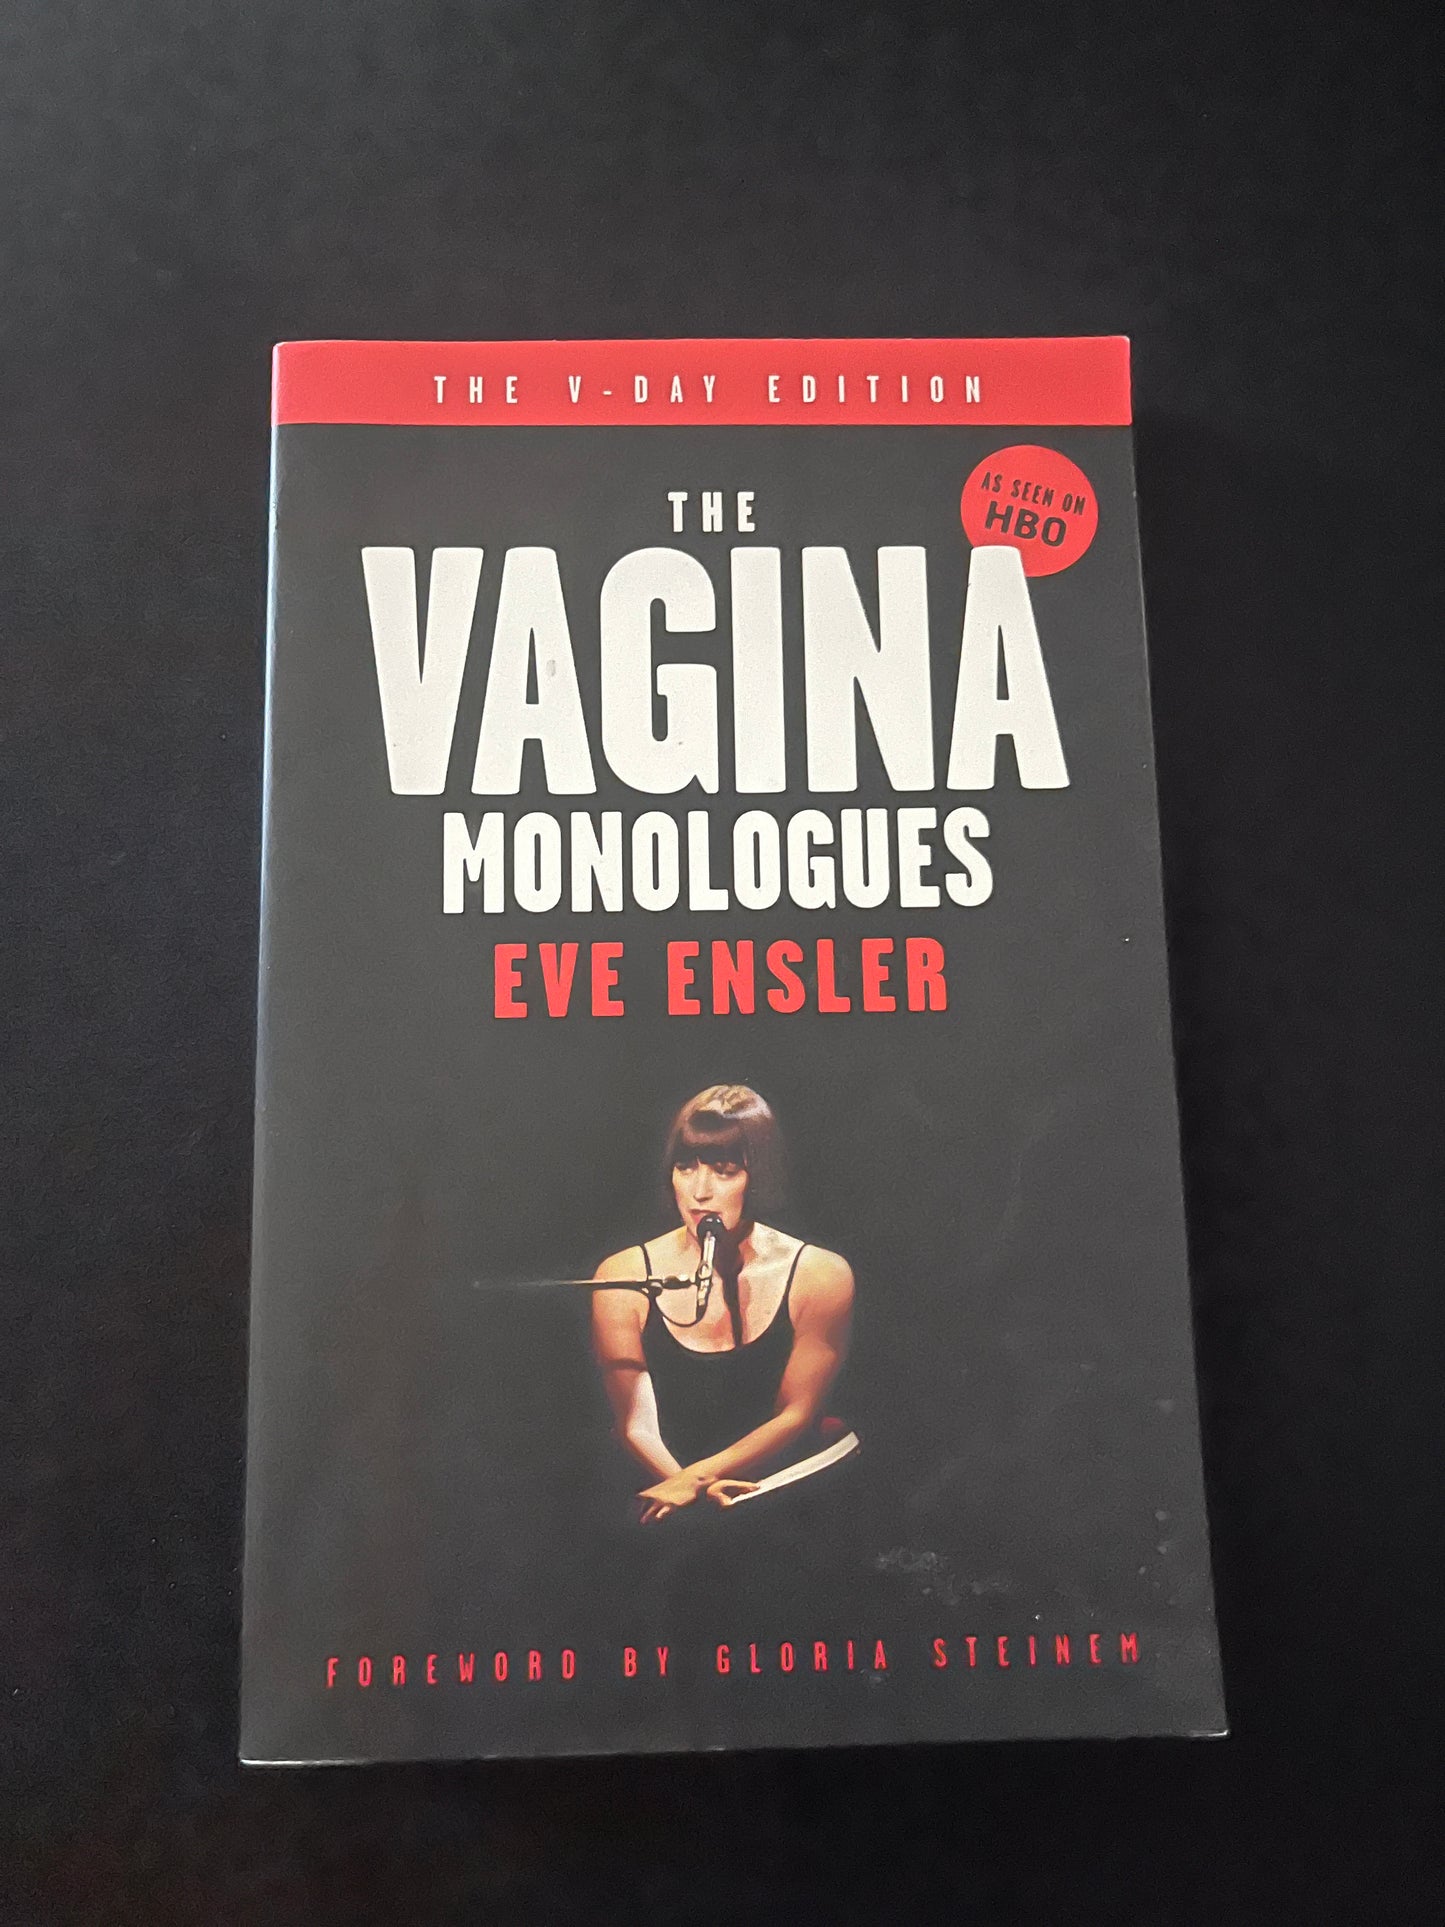 THE VAGINA MONOLOGUES by Eve Ensler